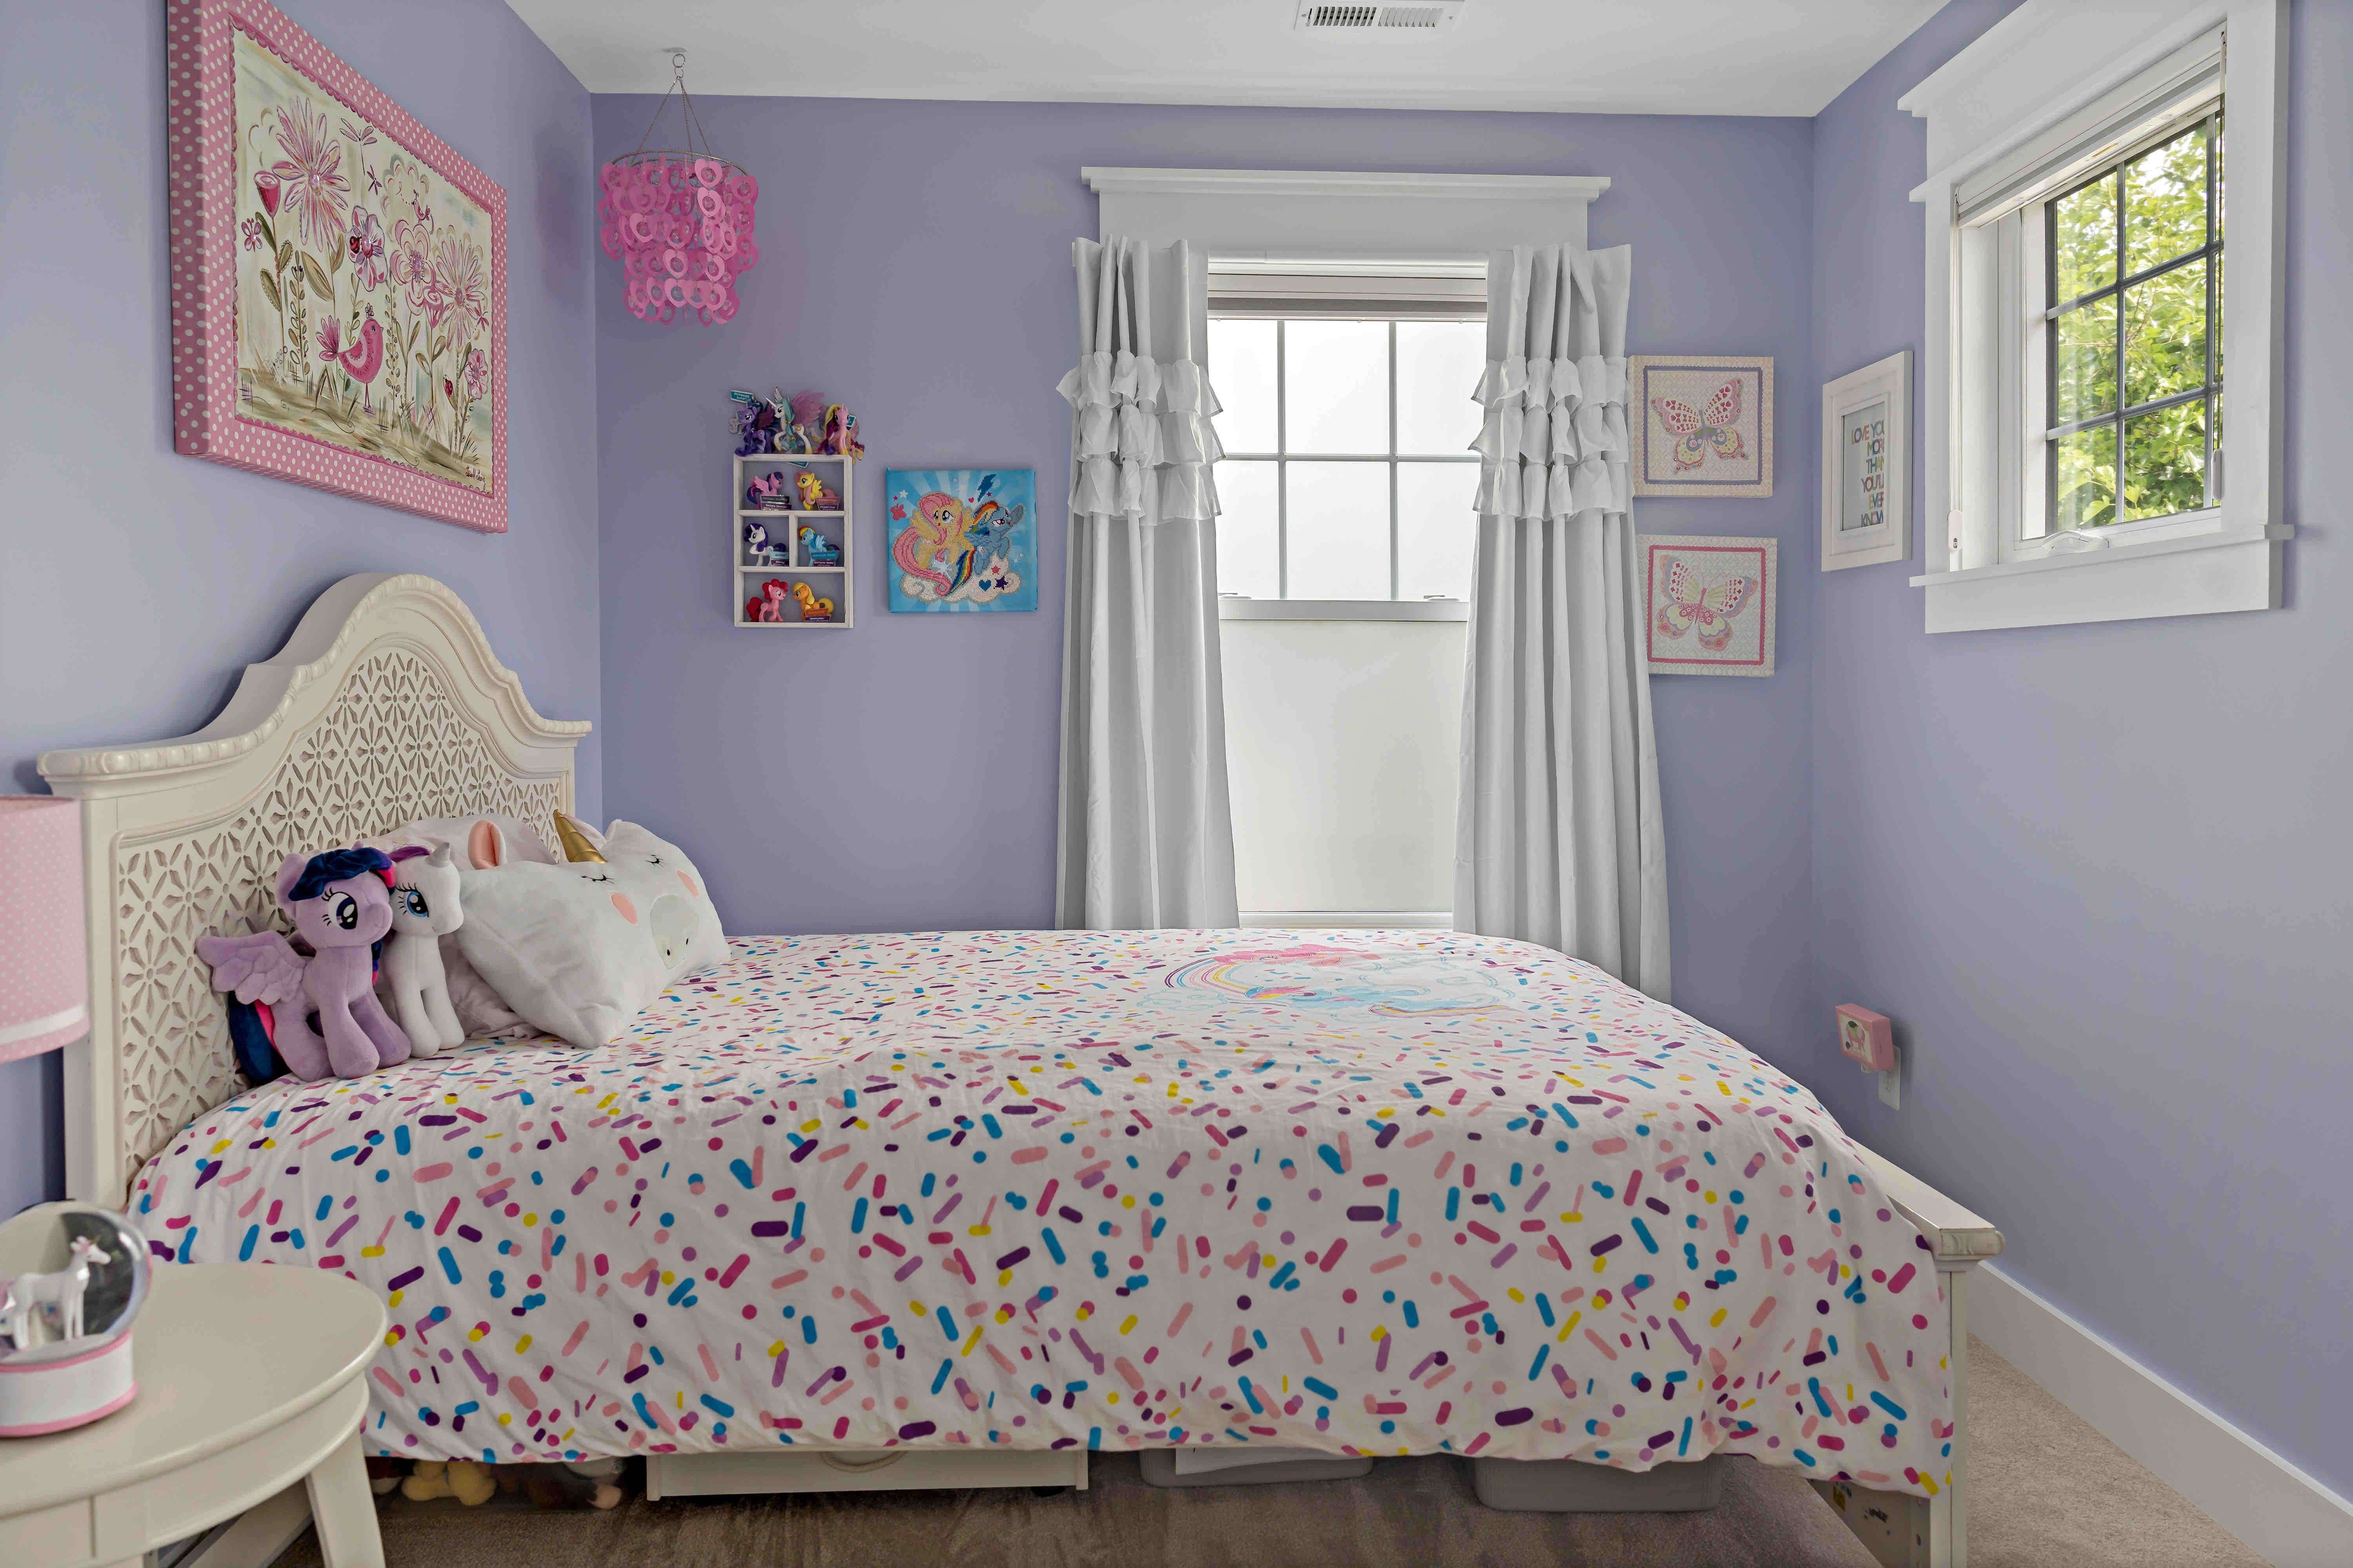 Girls bedroom with purple walls and white curtains